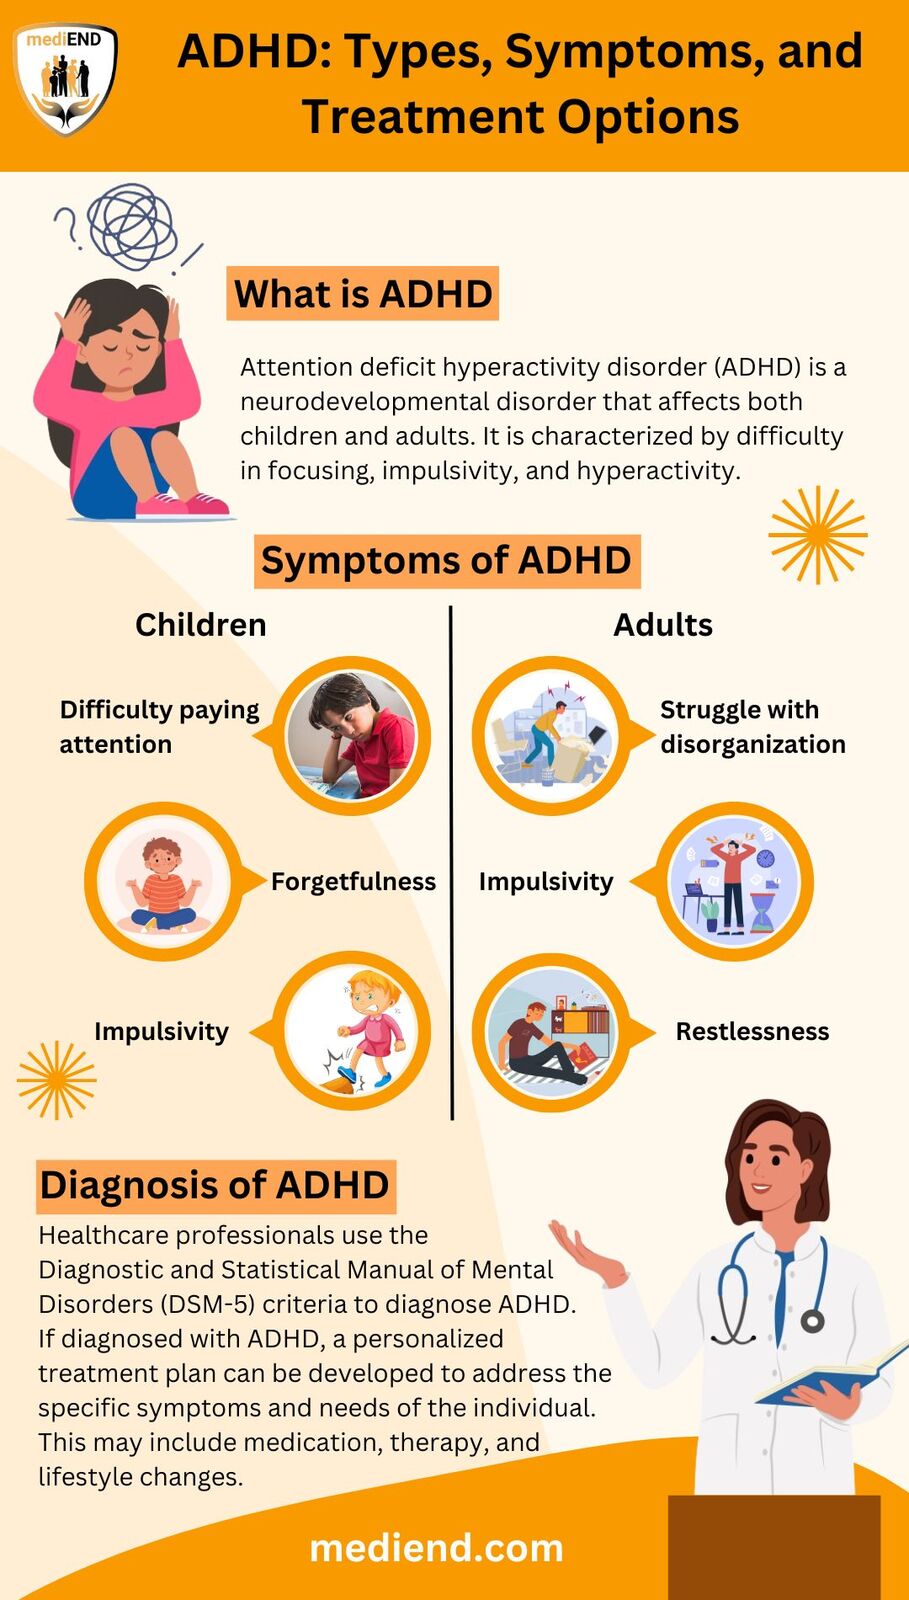 ADHD: Types, Symptoms, and Treatment Options